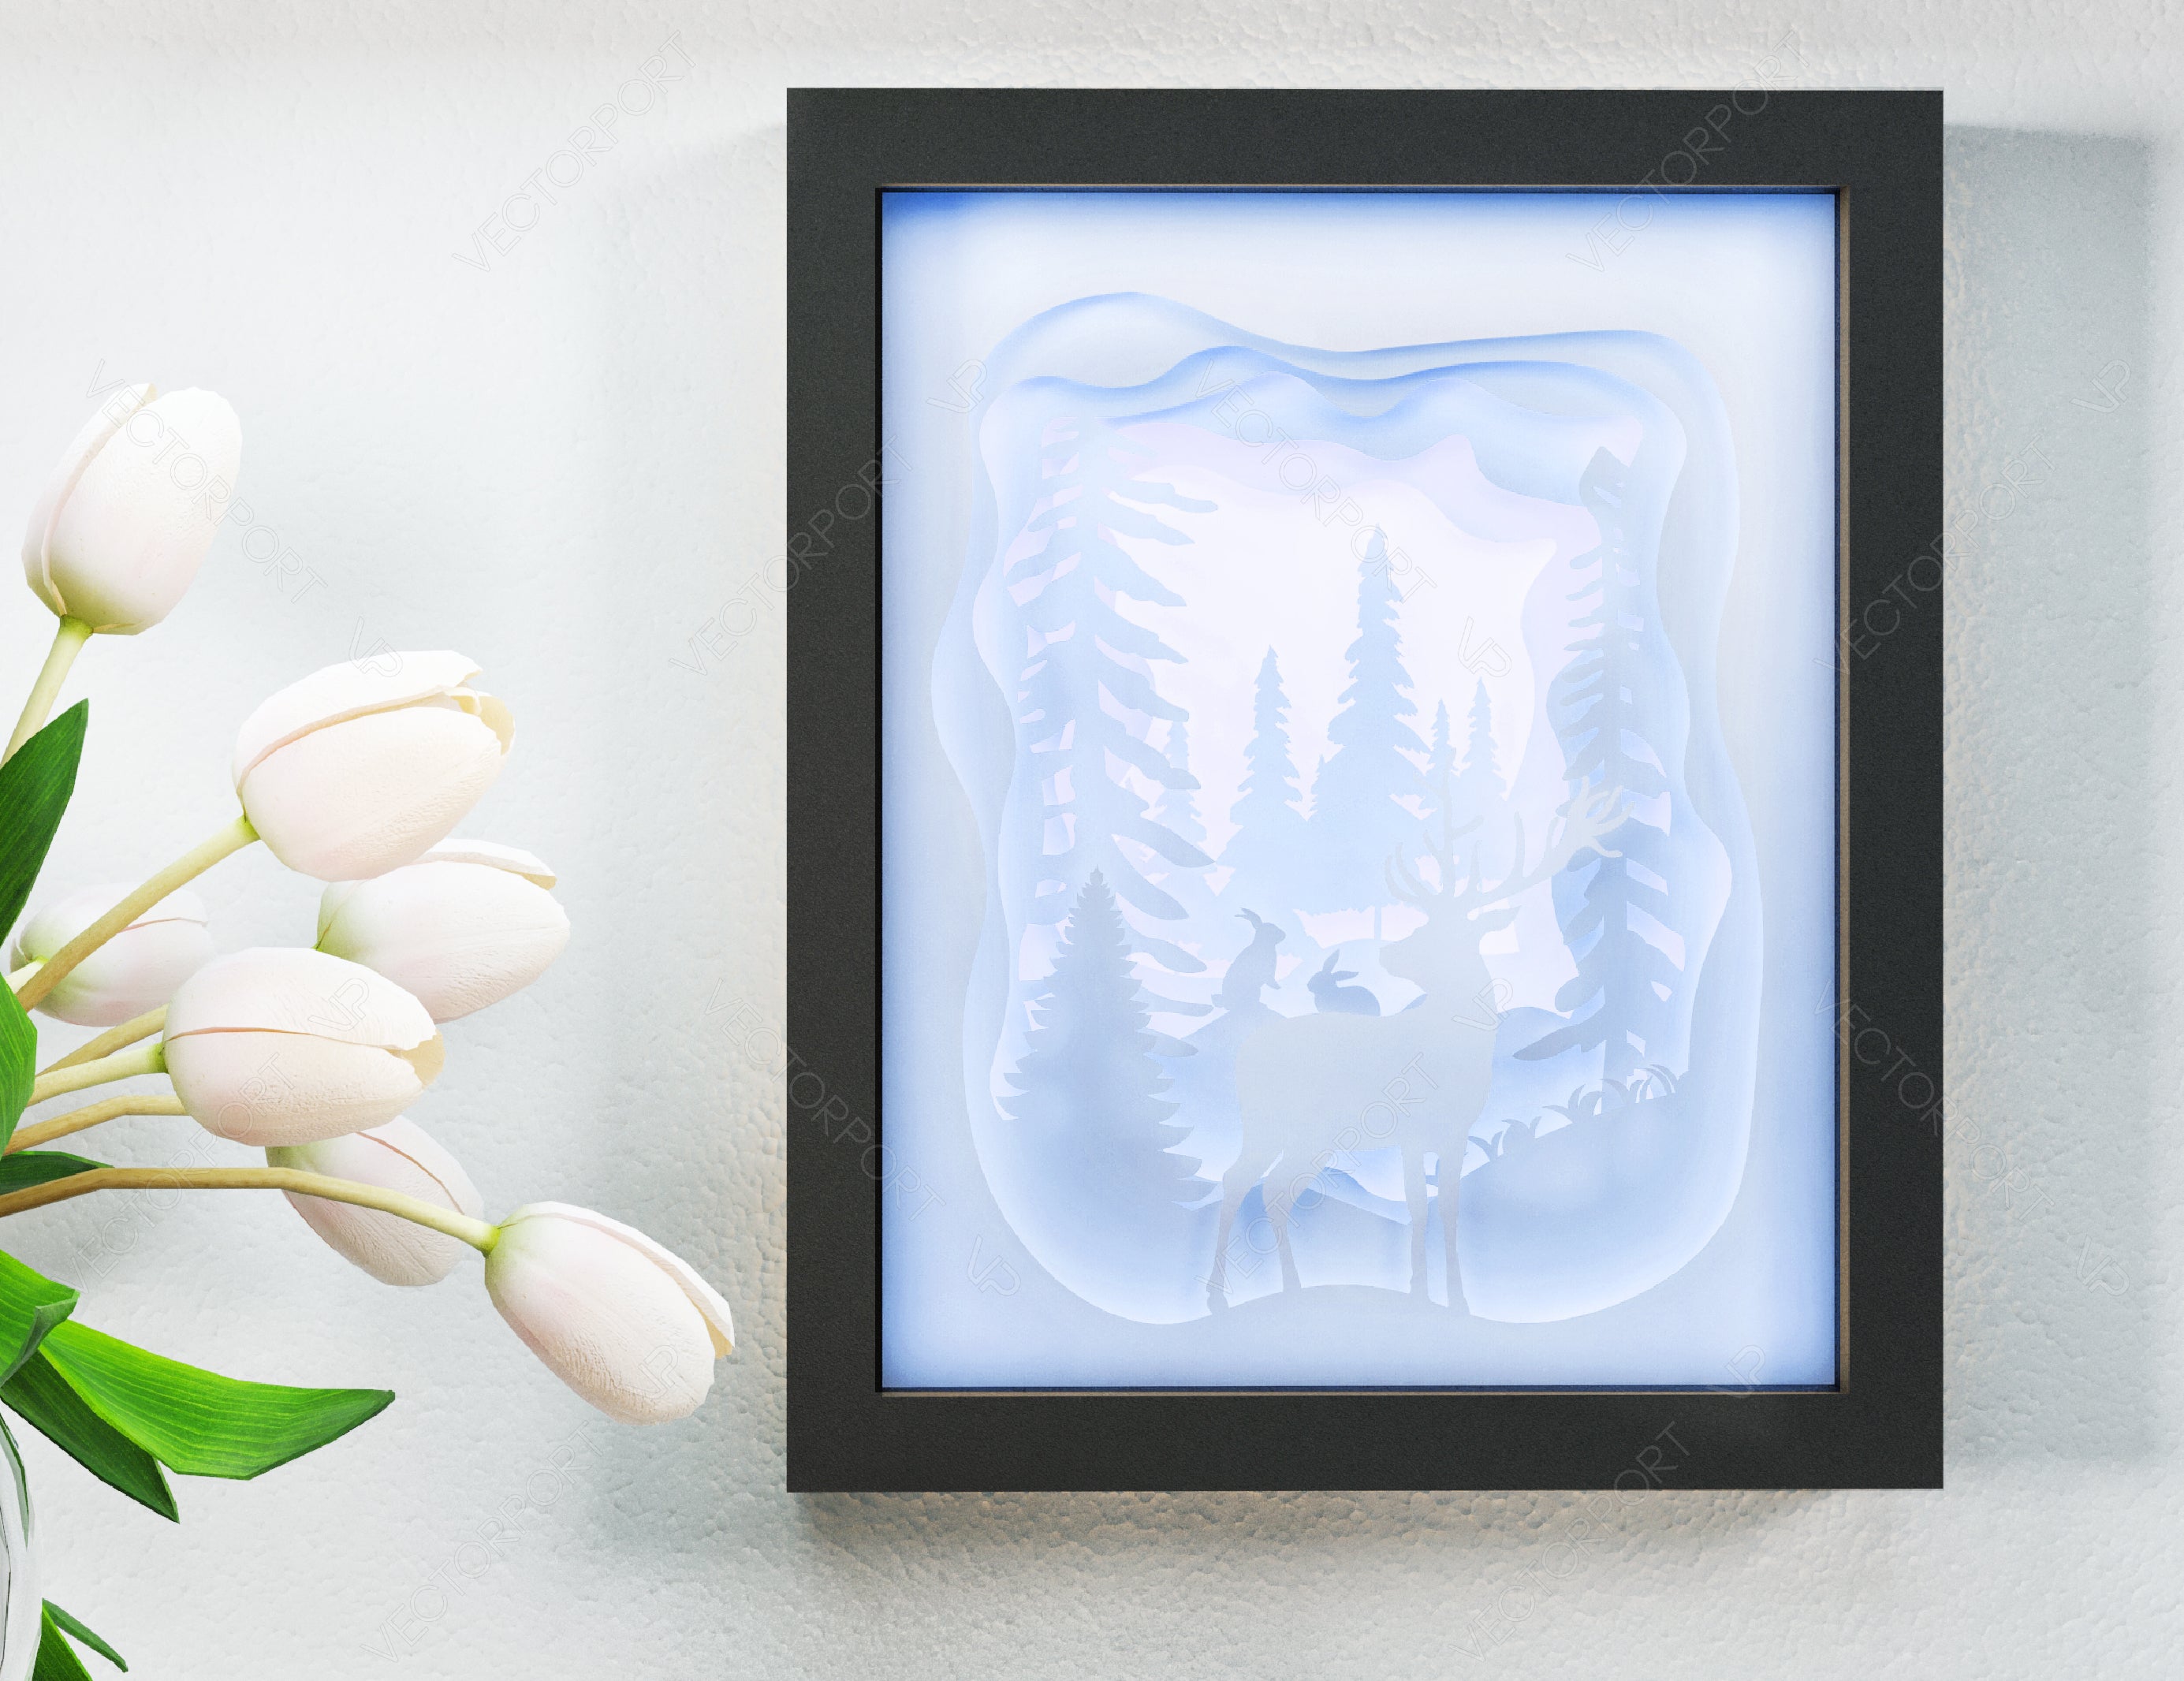 Paper cut Light Box, 3D Deer Forest Theme Shadow Box SVG template, Multi-layer shadow Box Diy Light box template with frame Digital Download SVG |#U246|